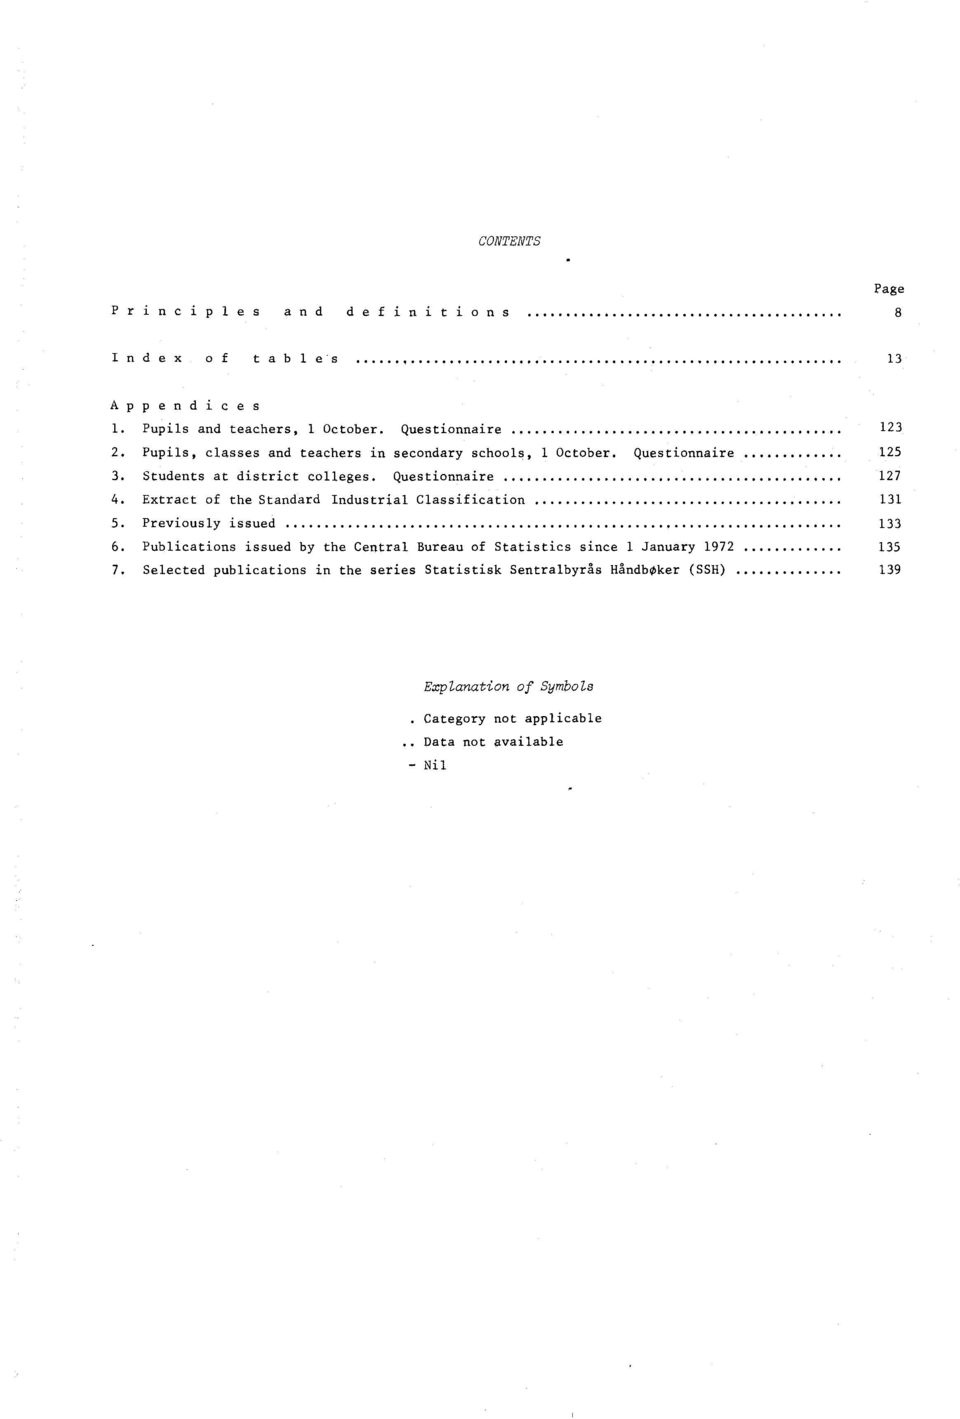 Extract of the Standard Industrial Classification 3 5. Previously issued 33 6.